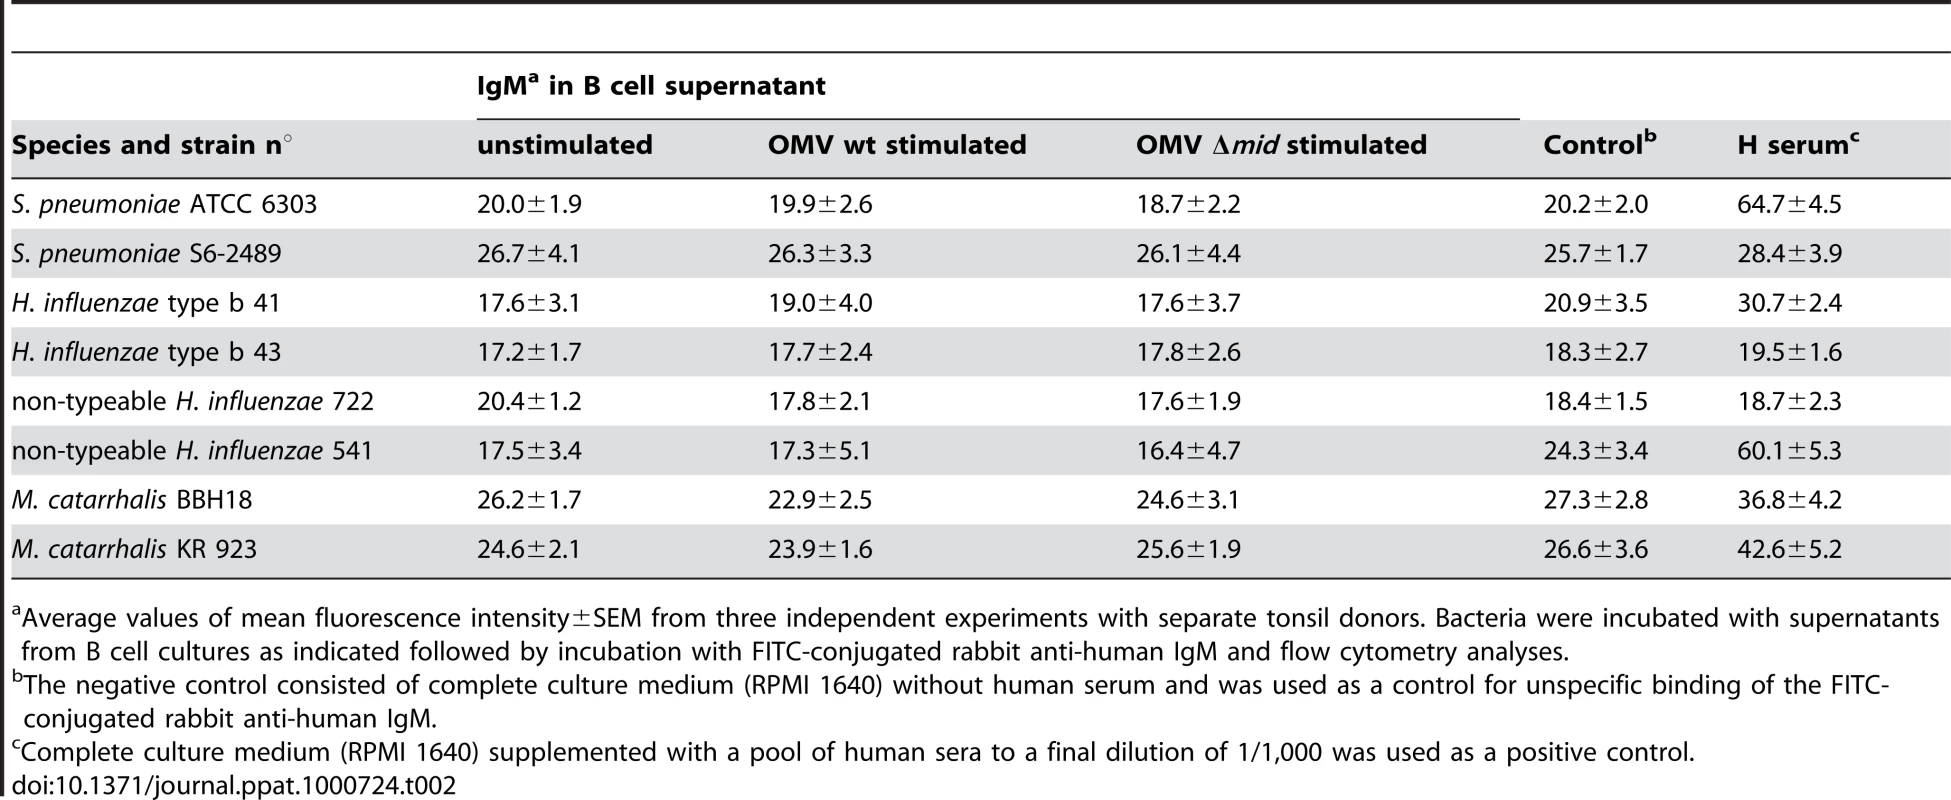 Analysis of the specificity of IgM in supernatants from human B cells stimulated with OMV.